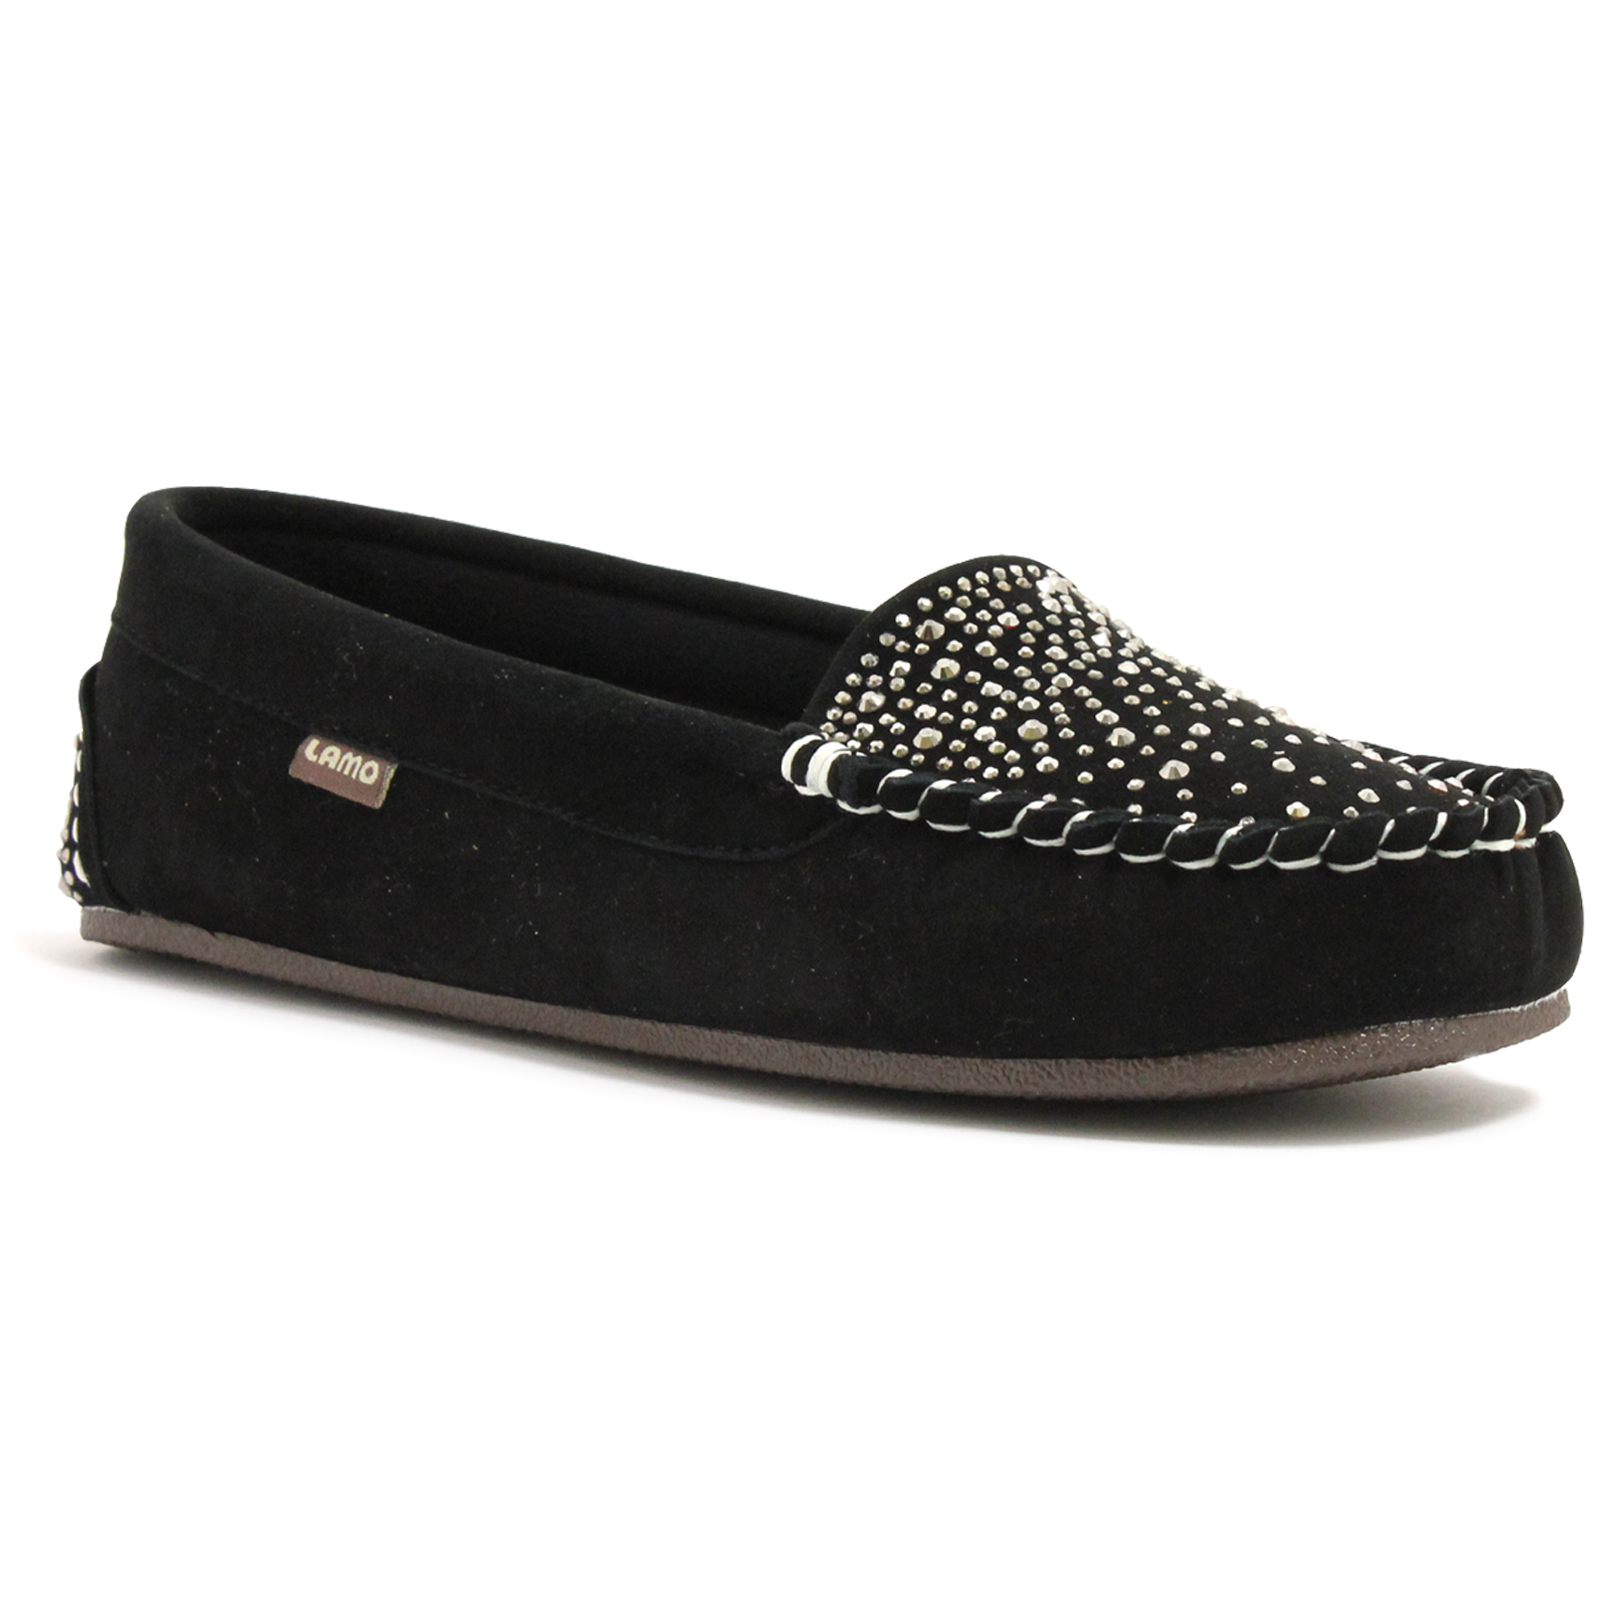 Women's Black Jewel-accented Moccasin